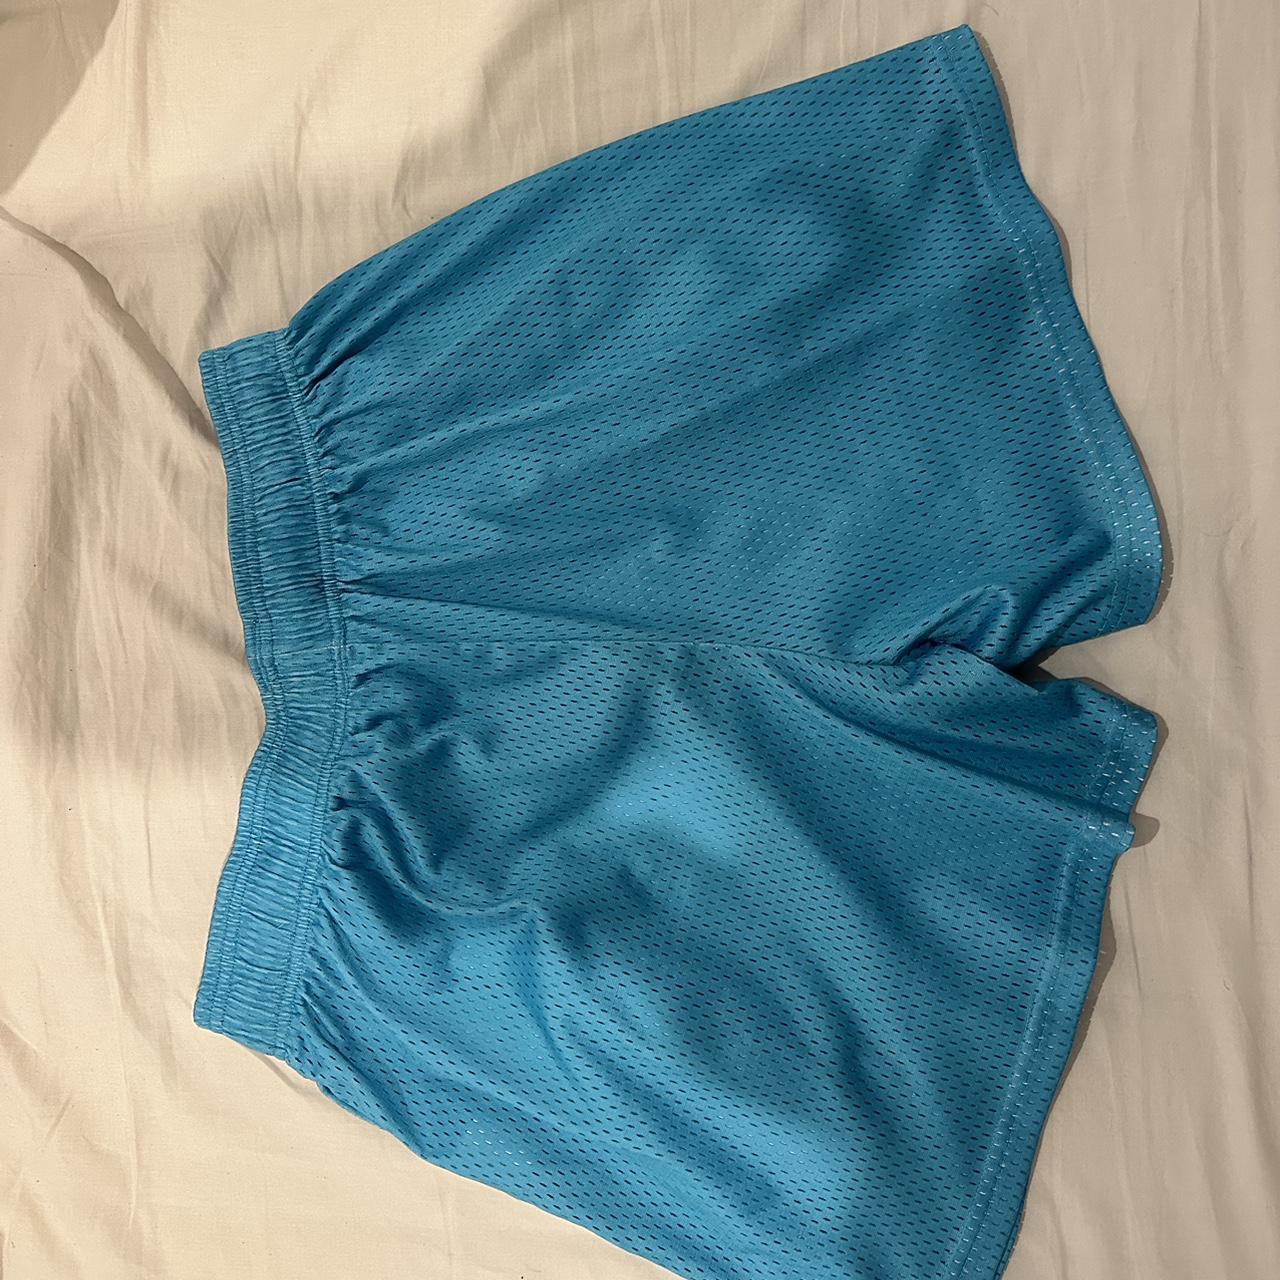 INAKA Power Baller Pack Shorts Size Large In mint... - Depop